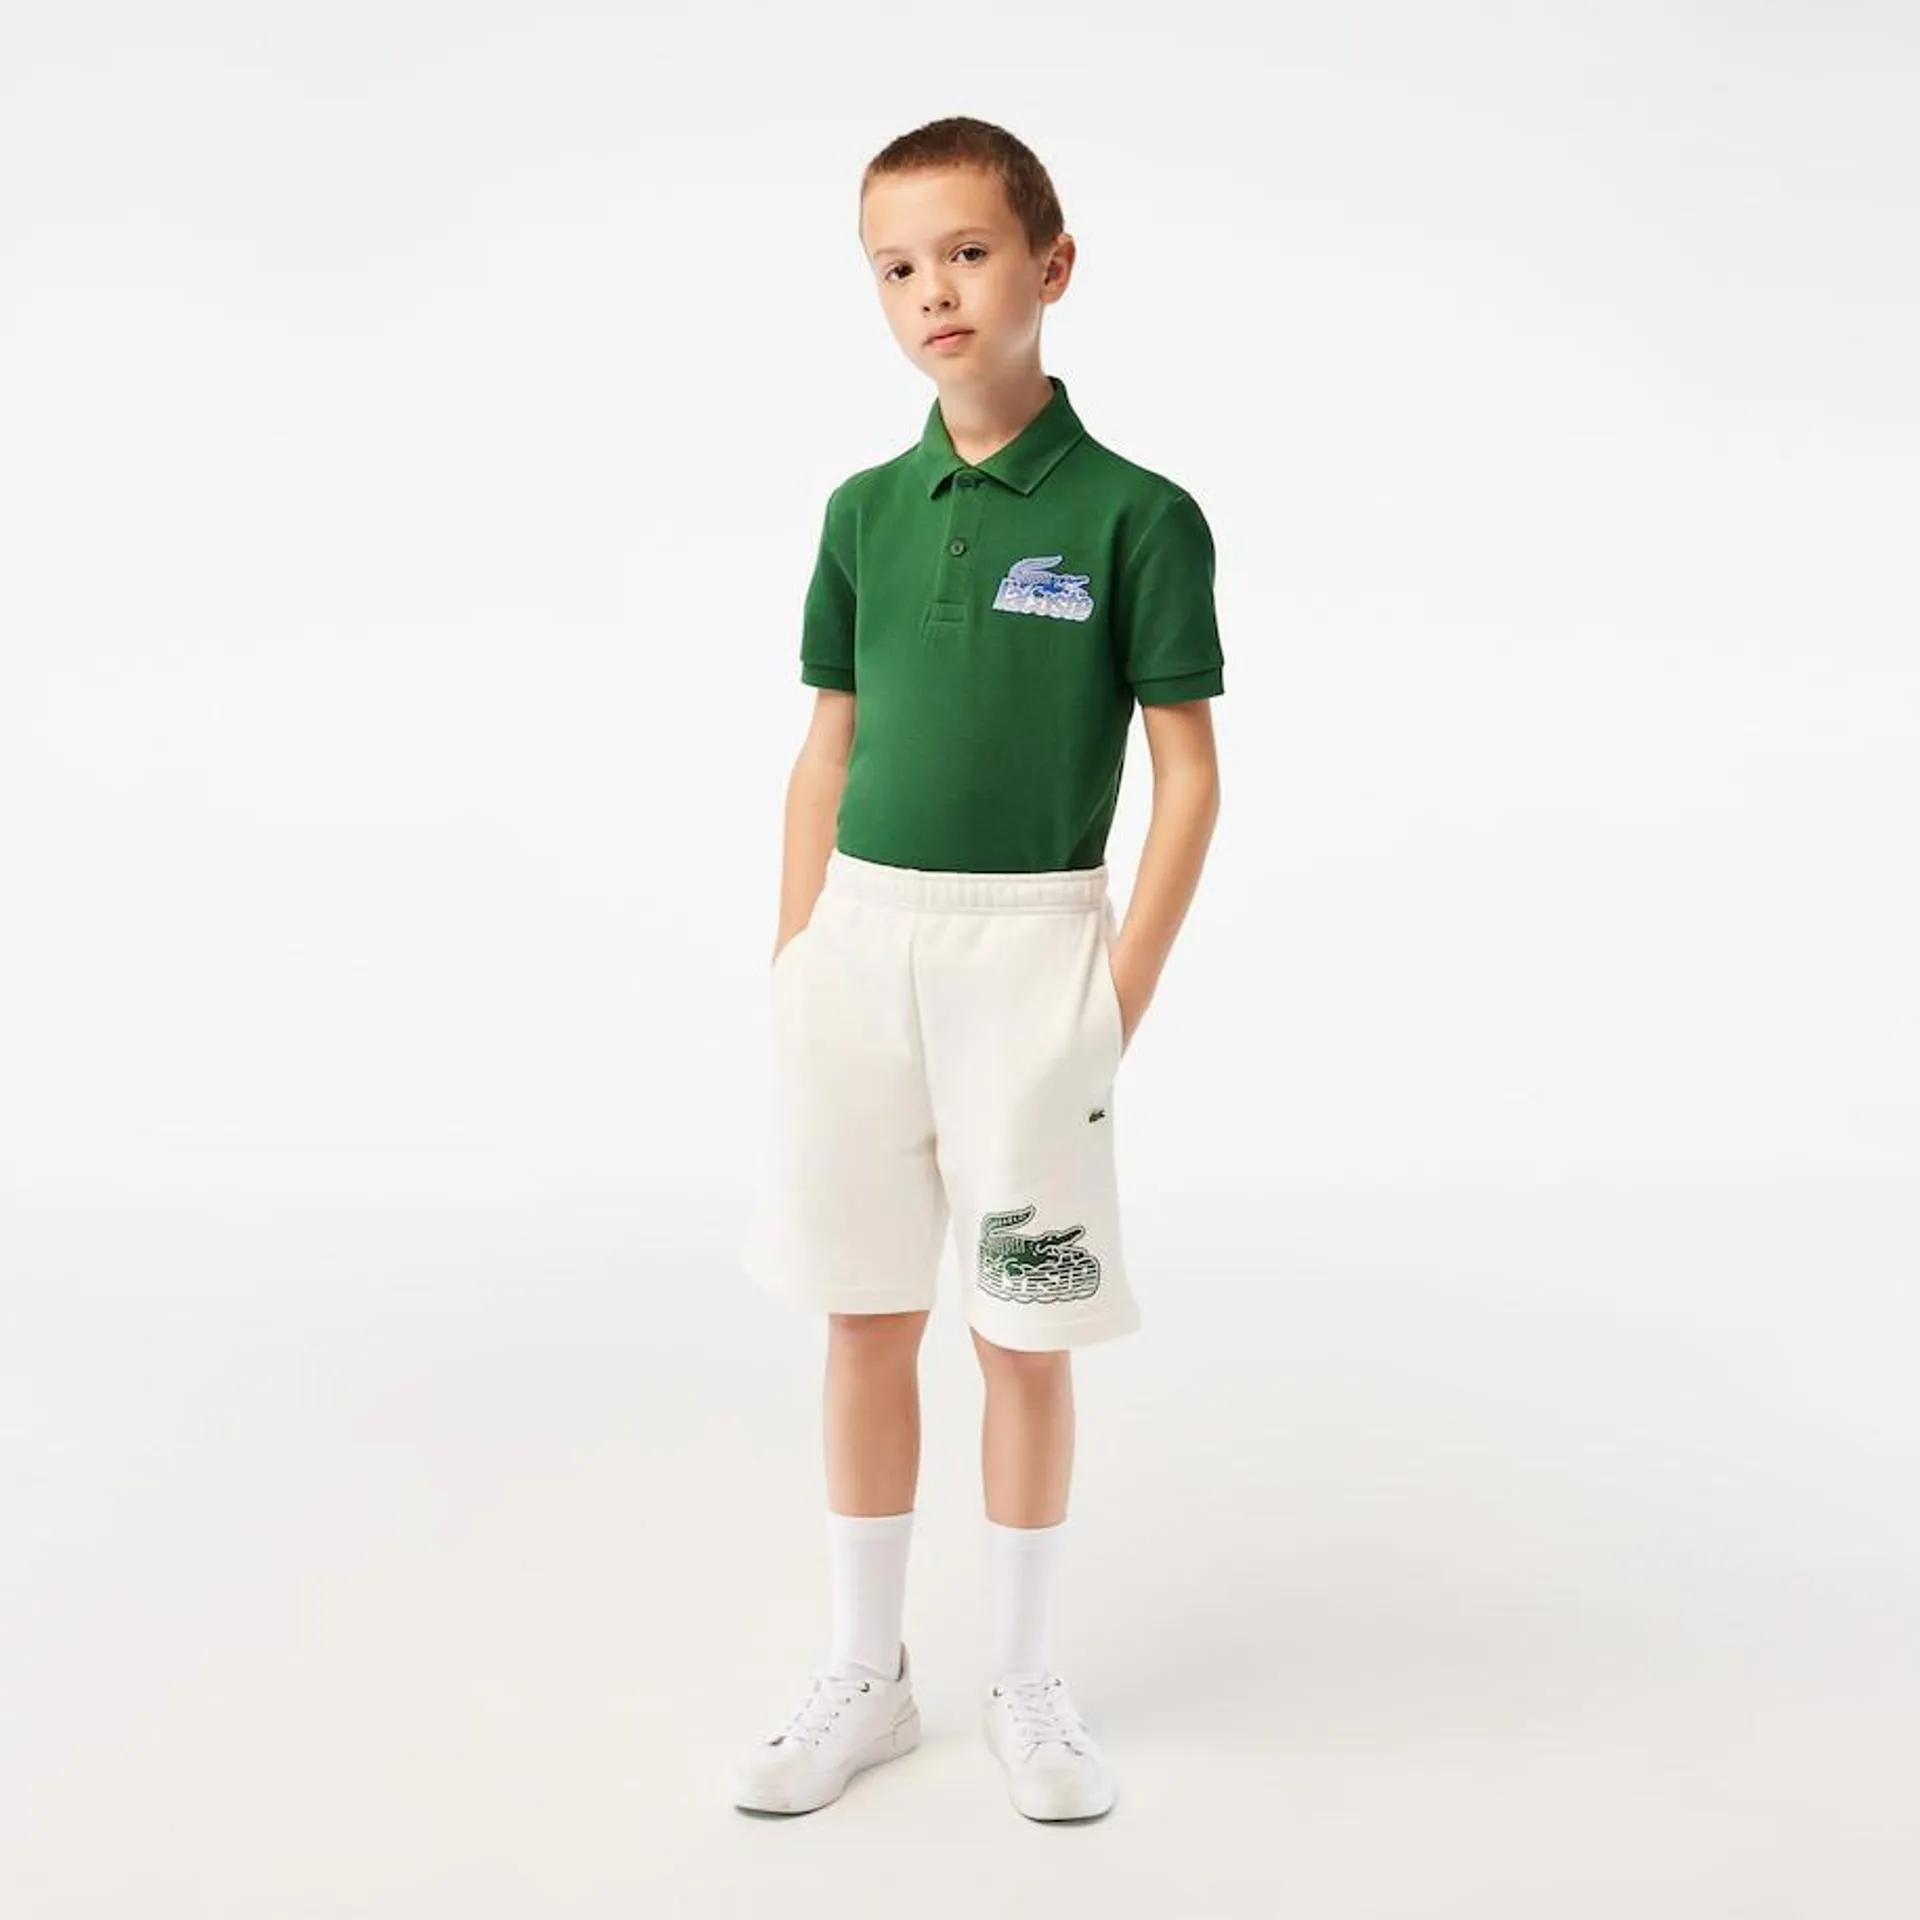 Boys’ Lacoste Contrast Print Branded Shorts